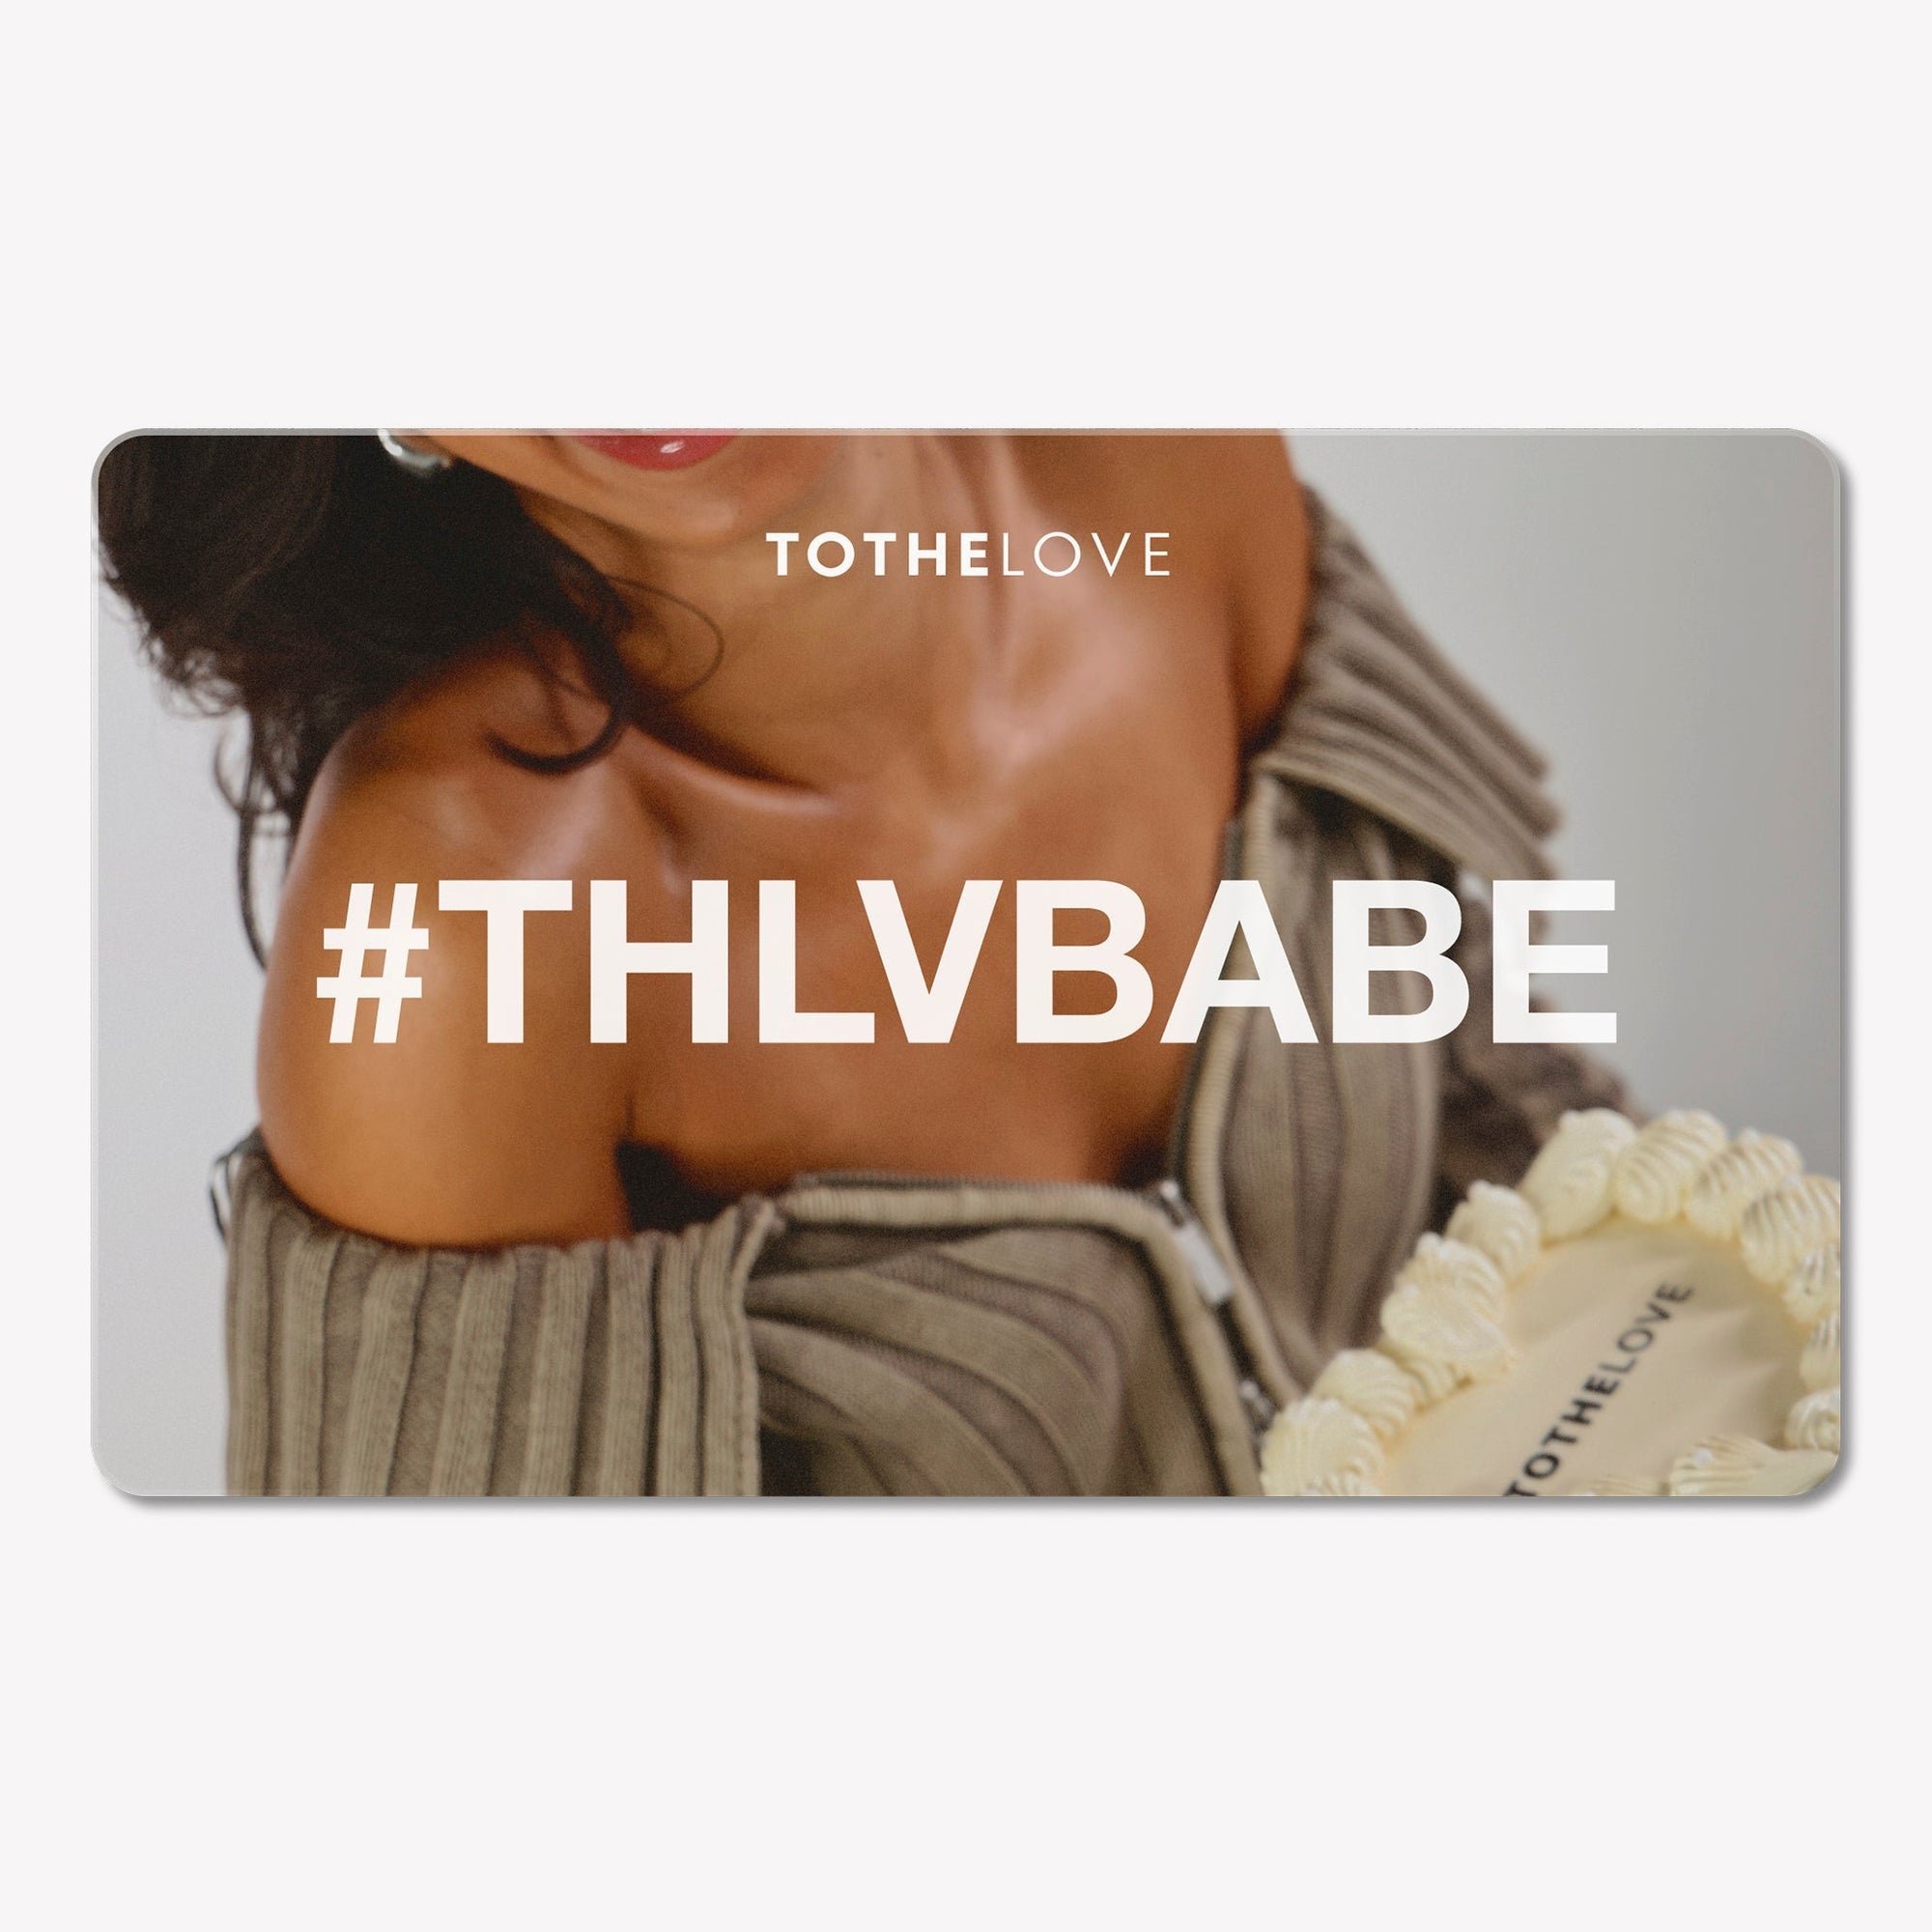 TOTHELOVE $50.00 GIFT CARD TOTHELOVE